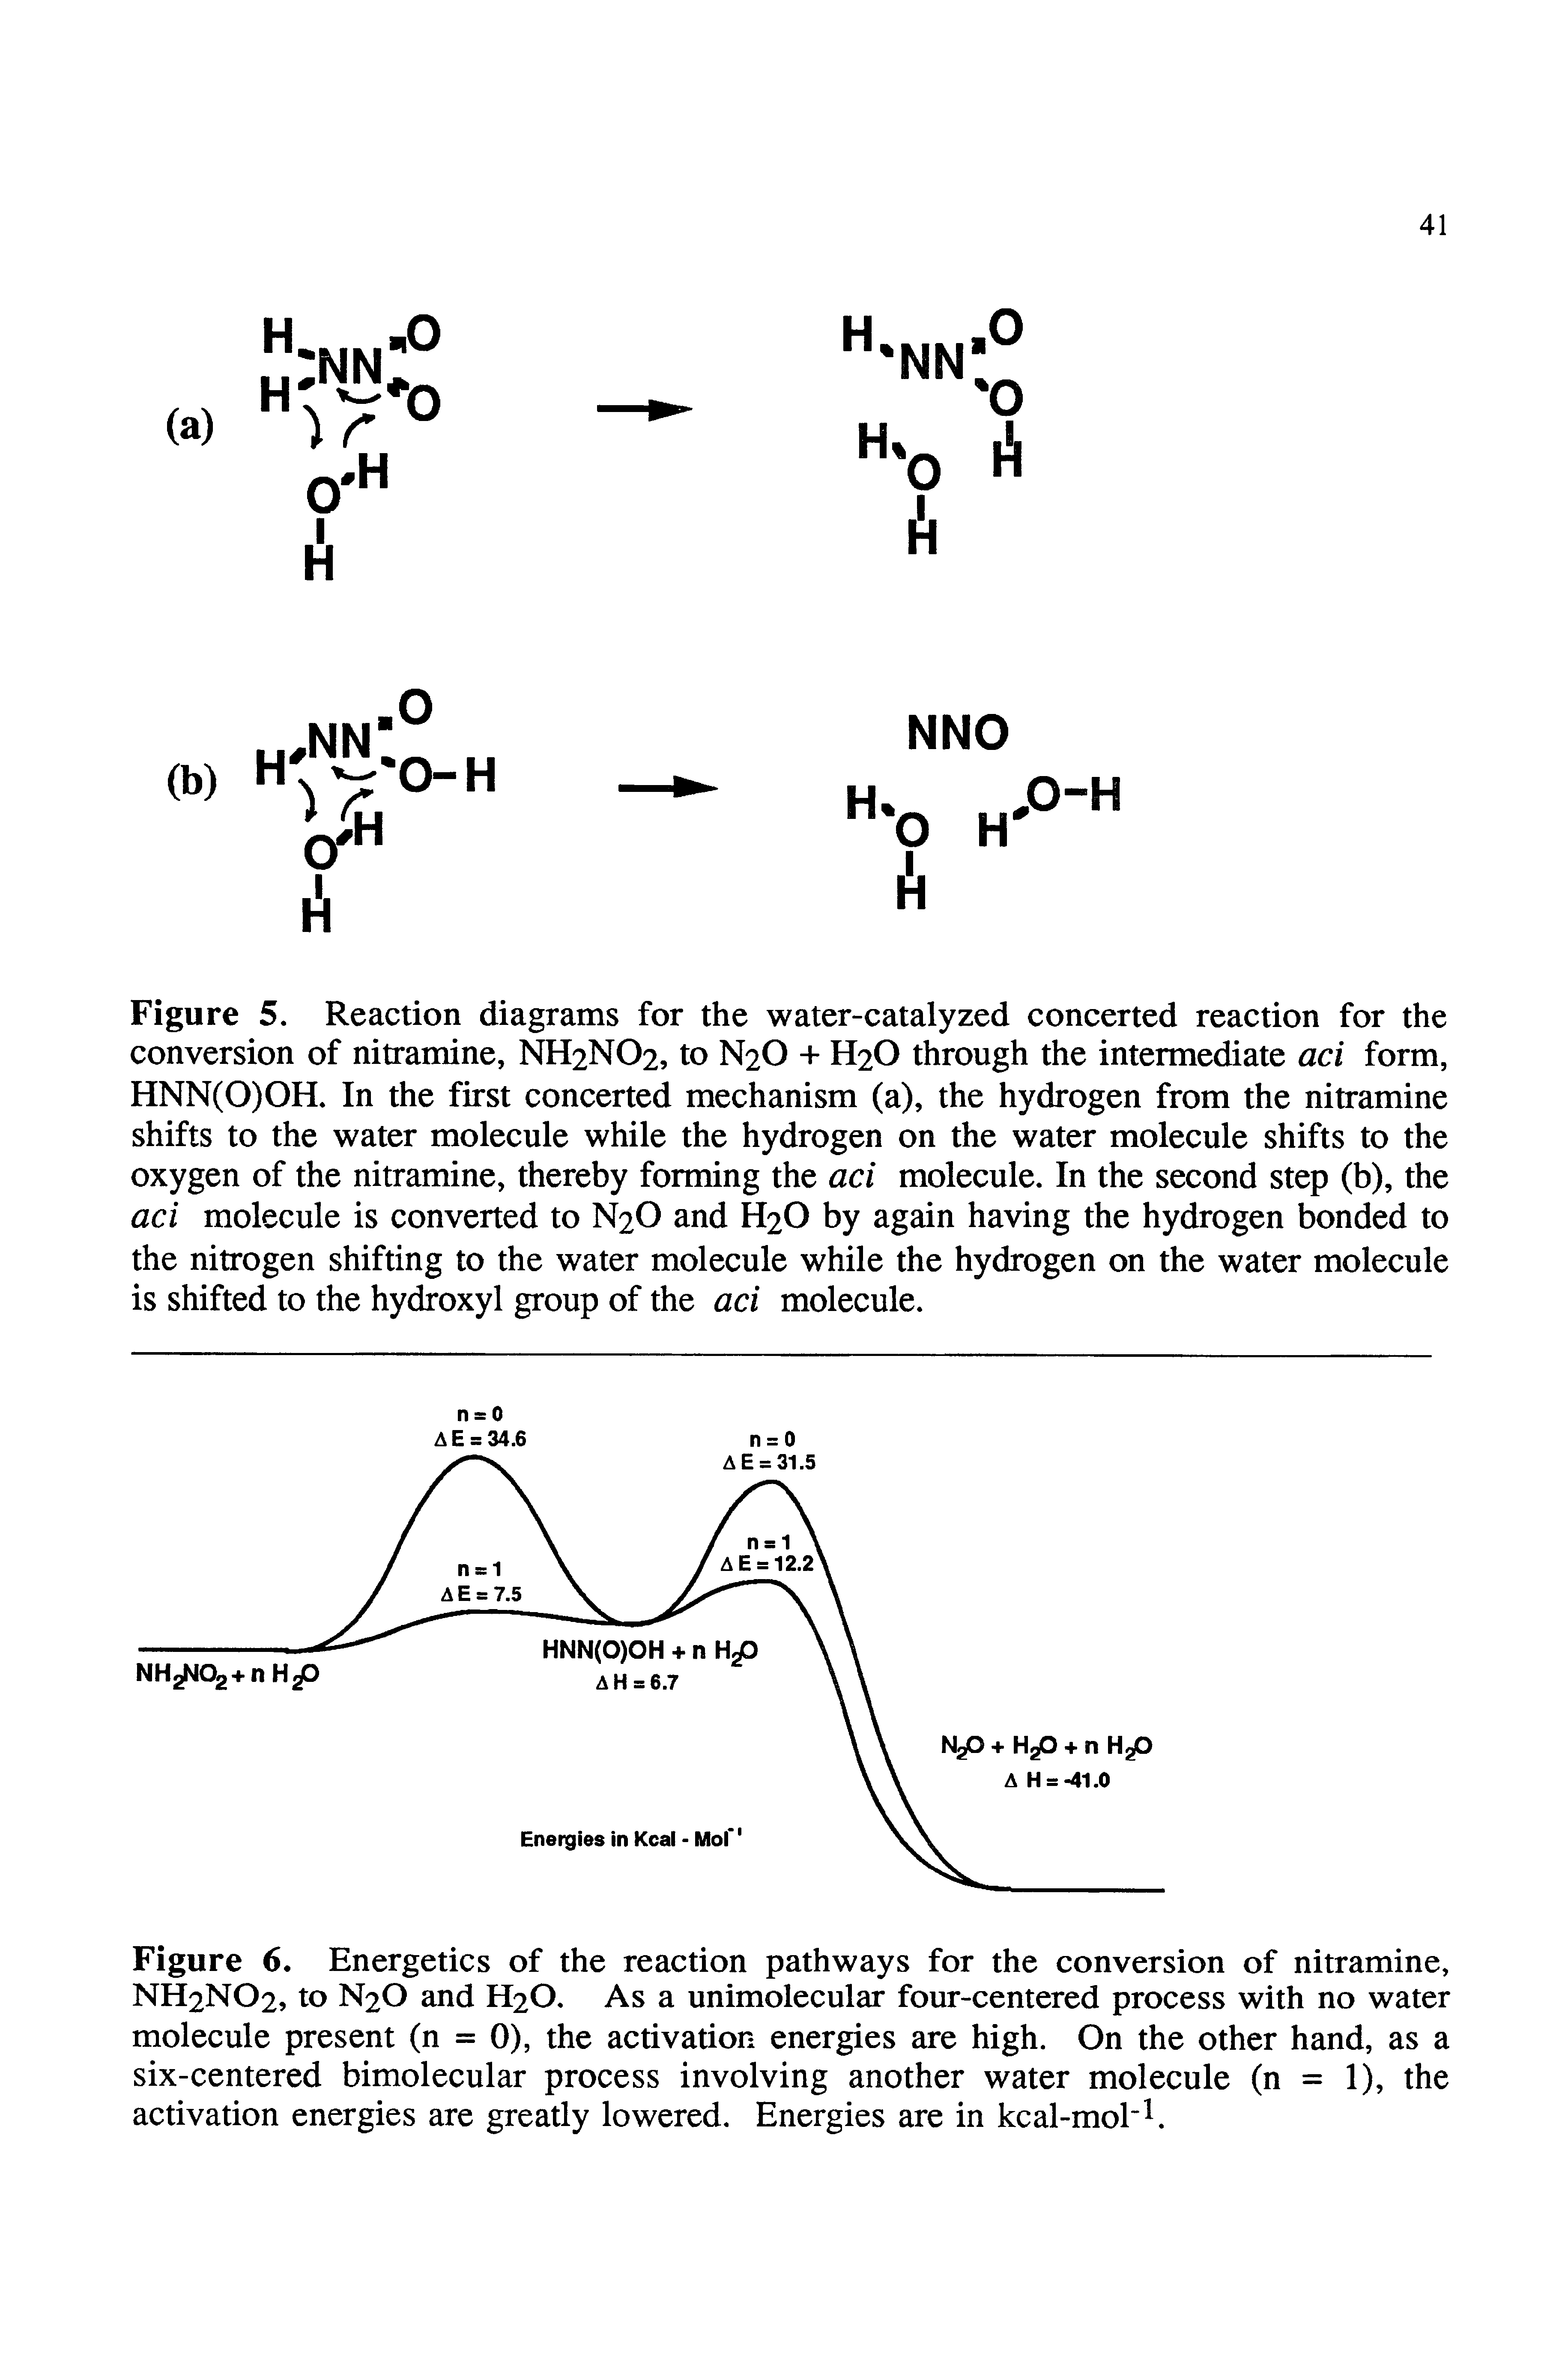 Figure 6. Energetics of the reaction pathways for the conversion of nitramine, NH2NO2, to N2O and H2O. As a unimolecular four-centered process with no water molecule present (n = 0), the activation energies are high. On the other hand, as a six-centered bimolecular process involving another water molecule (n = 1), the activation energies are greatly lowered. Energies are in kcal-mol l.